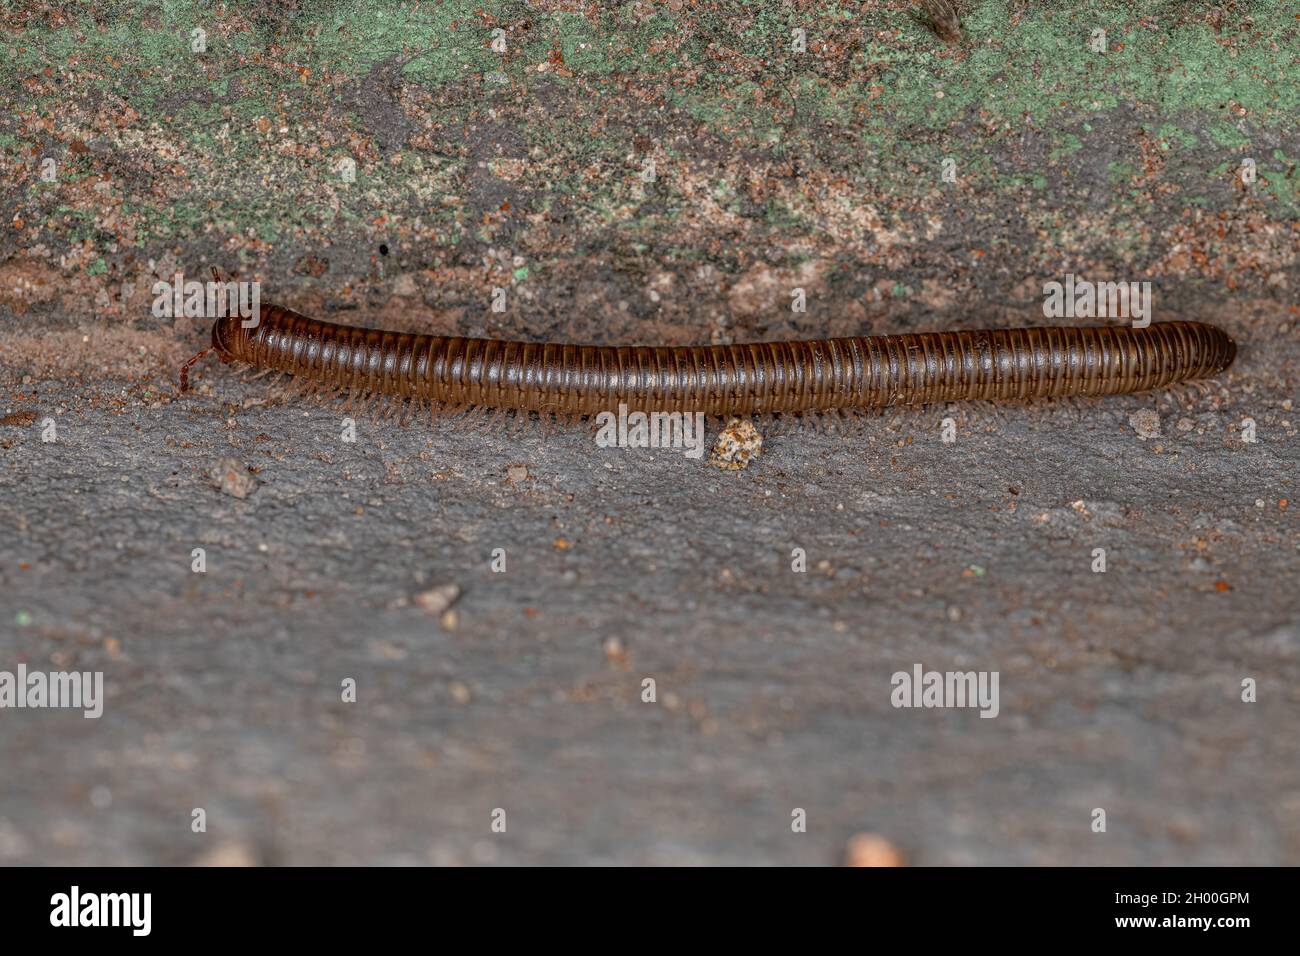 Adult Common Brown Millipede of the Order Spirostreptida Stock Photo